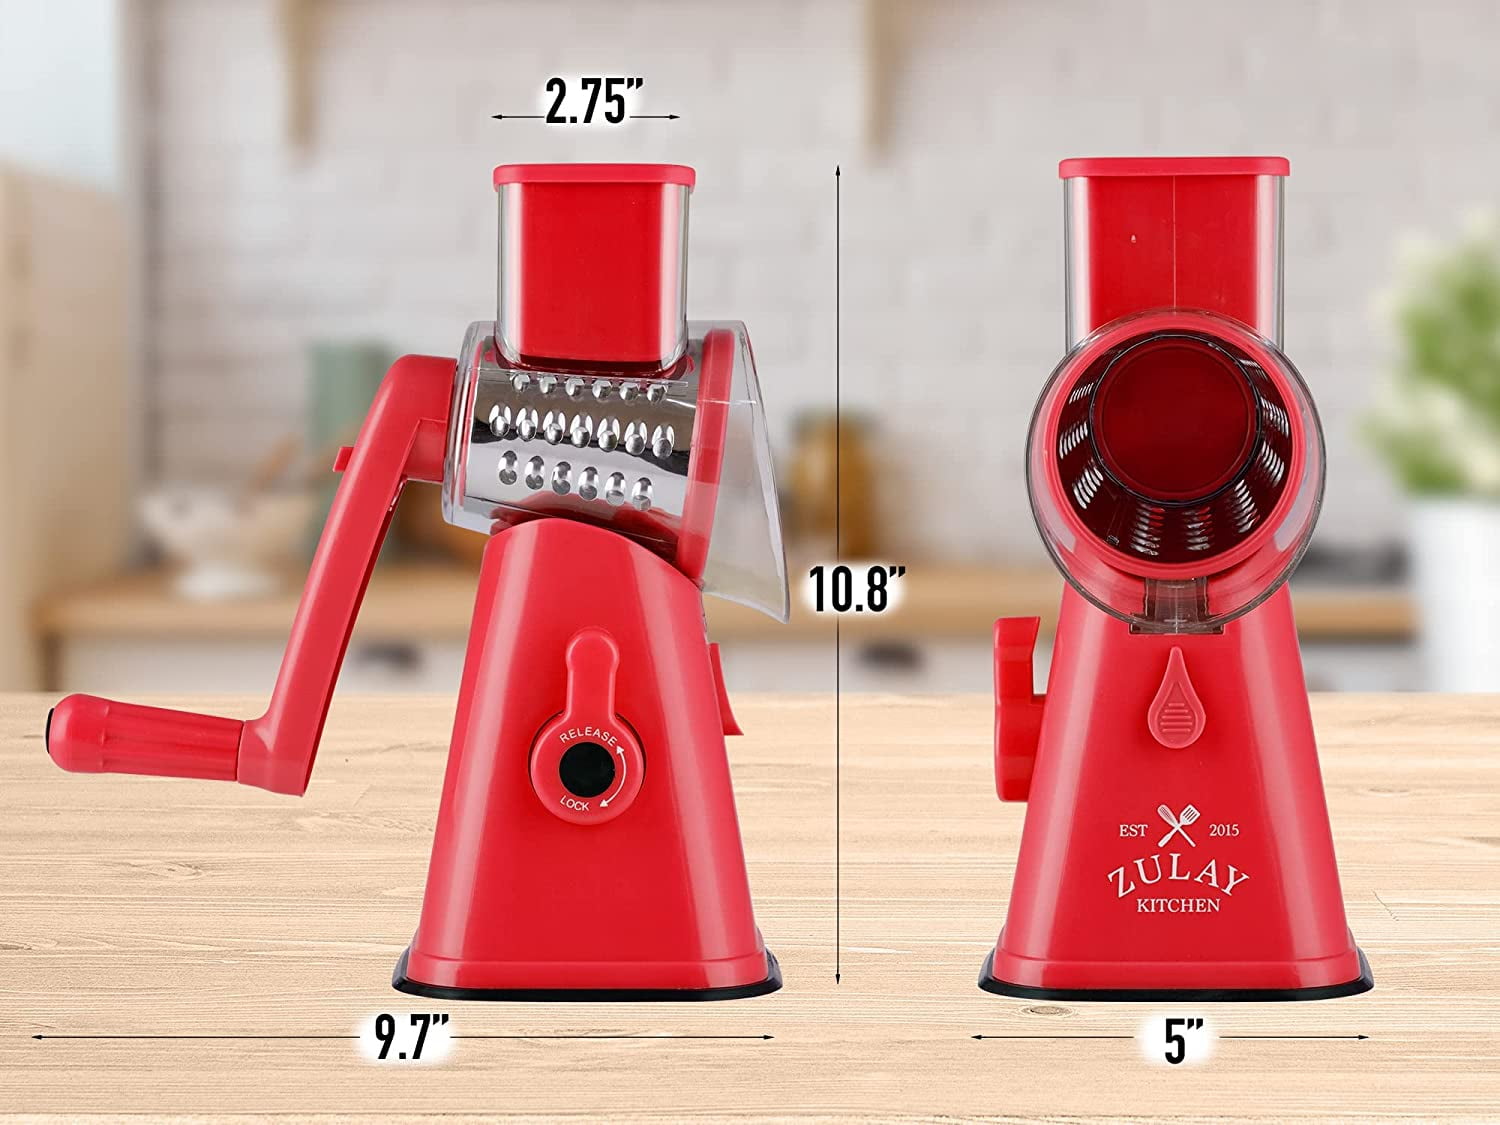  Zulay Kitchen Professional Cheese Grater Stainless